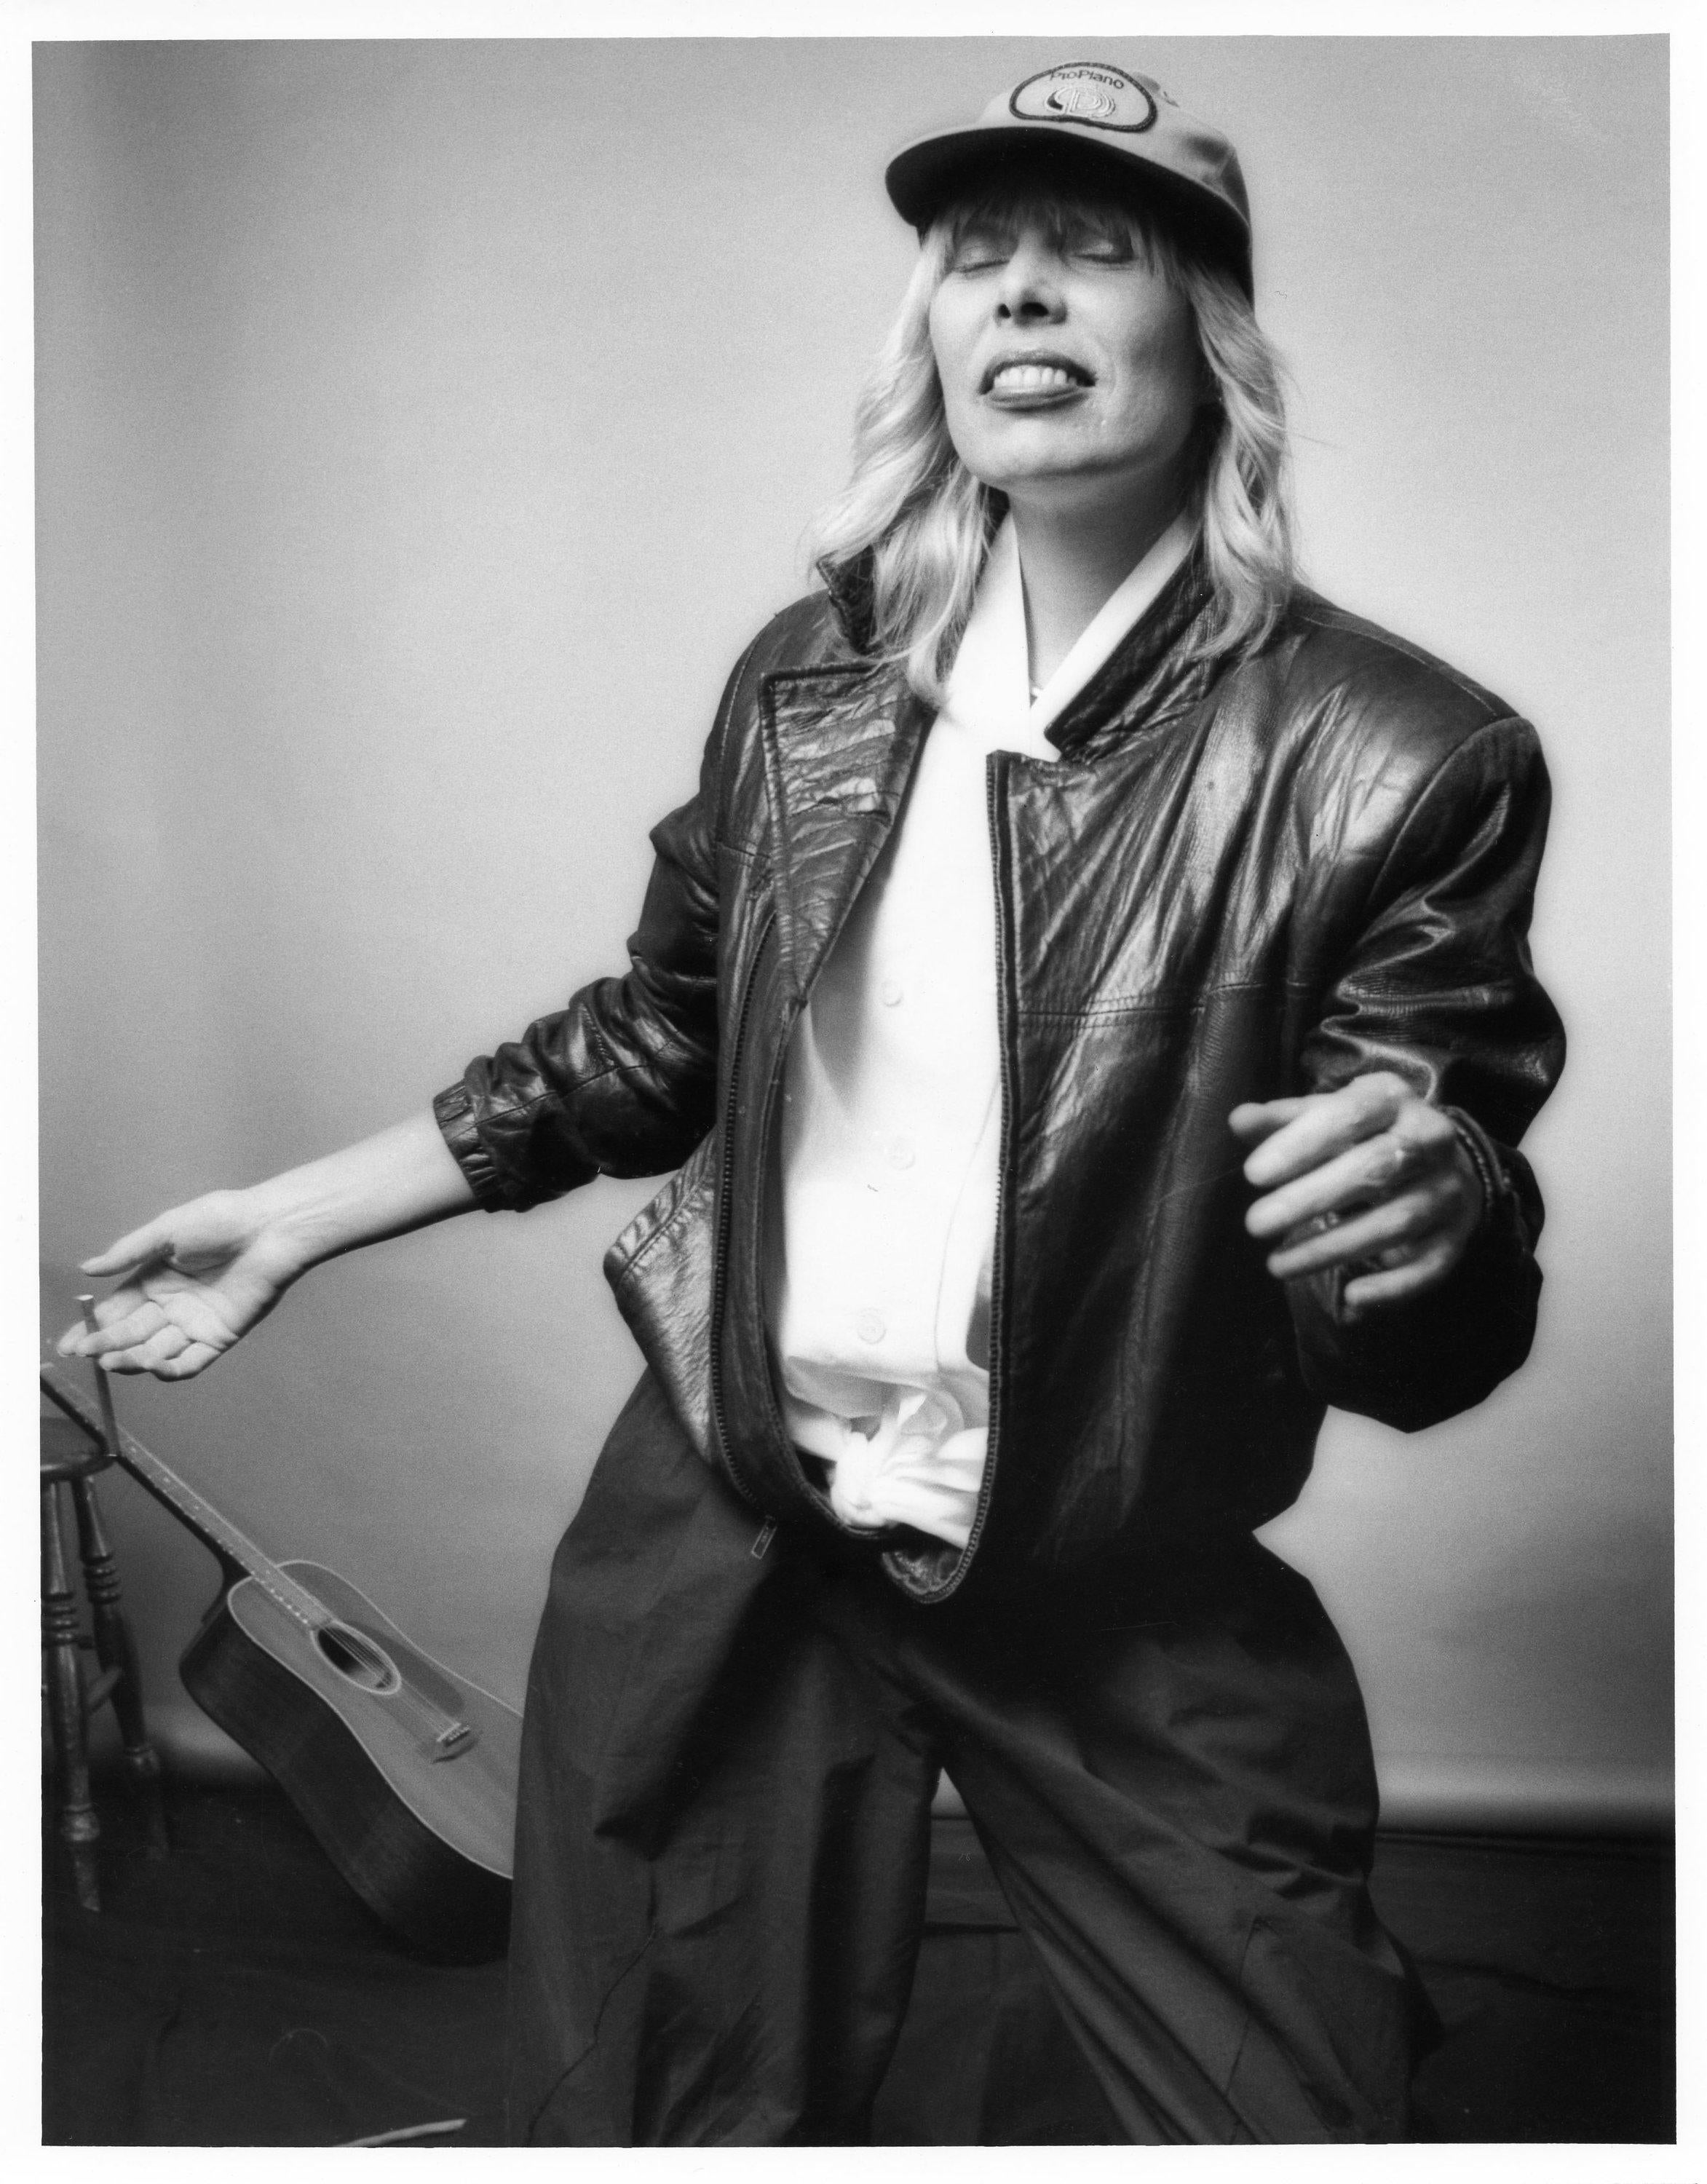 Original vintage 8x10” work print from Norman Seeff of Joni Mitchell. Hand printed in 1983 at the time of the photoshoot, signed on the back by Norman Seeff and also featuring his studio stamp.

In excellent condition having been stored flat in a